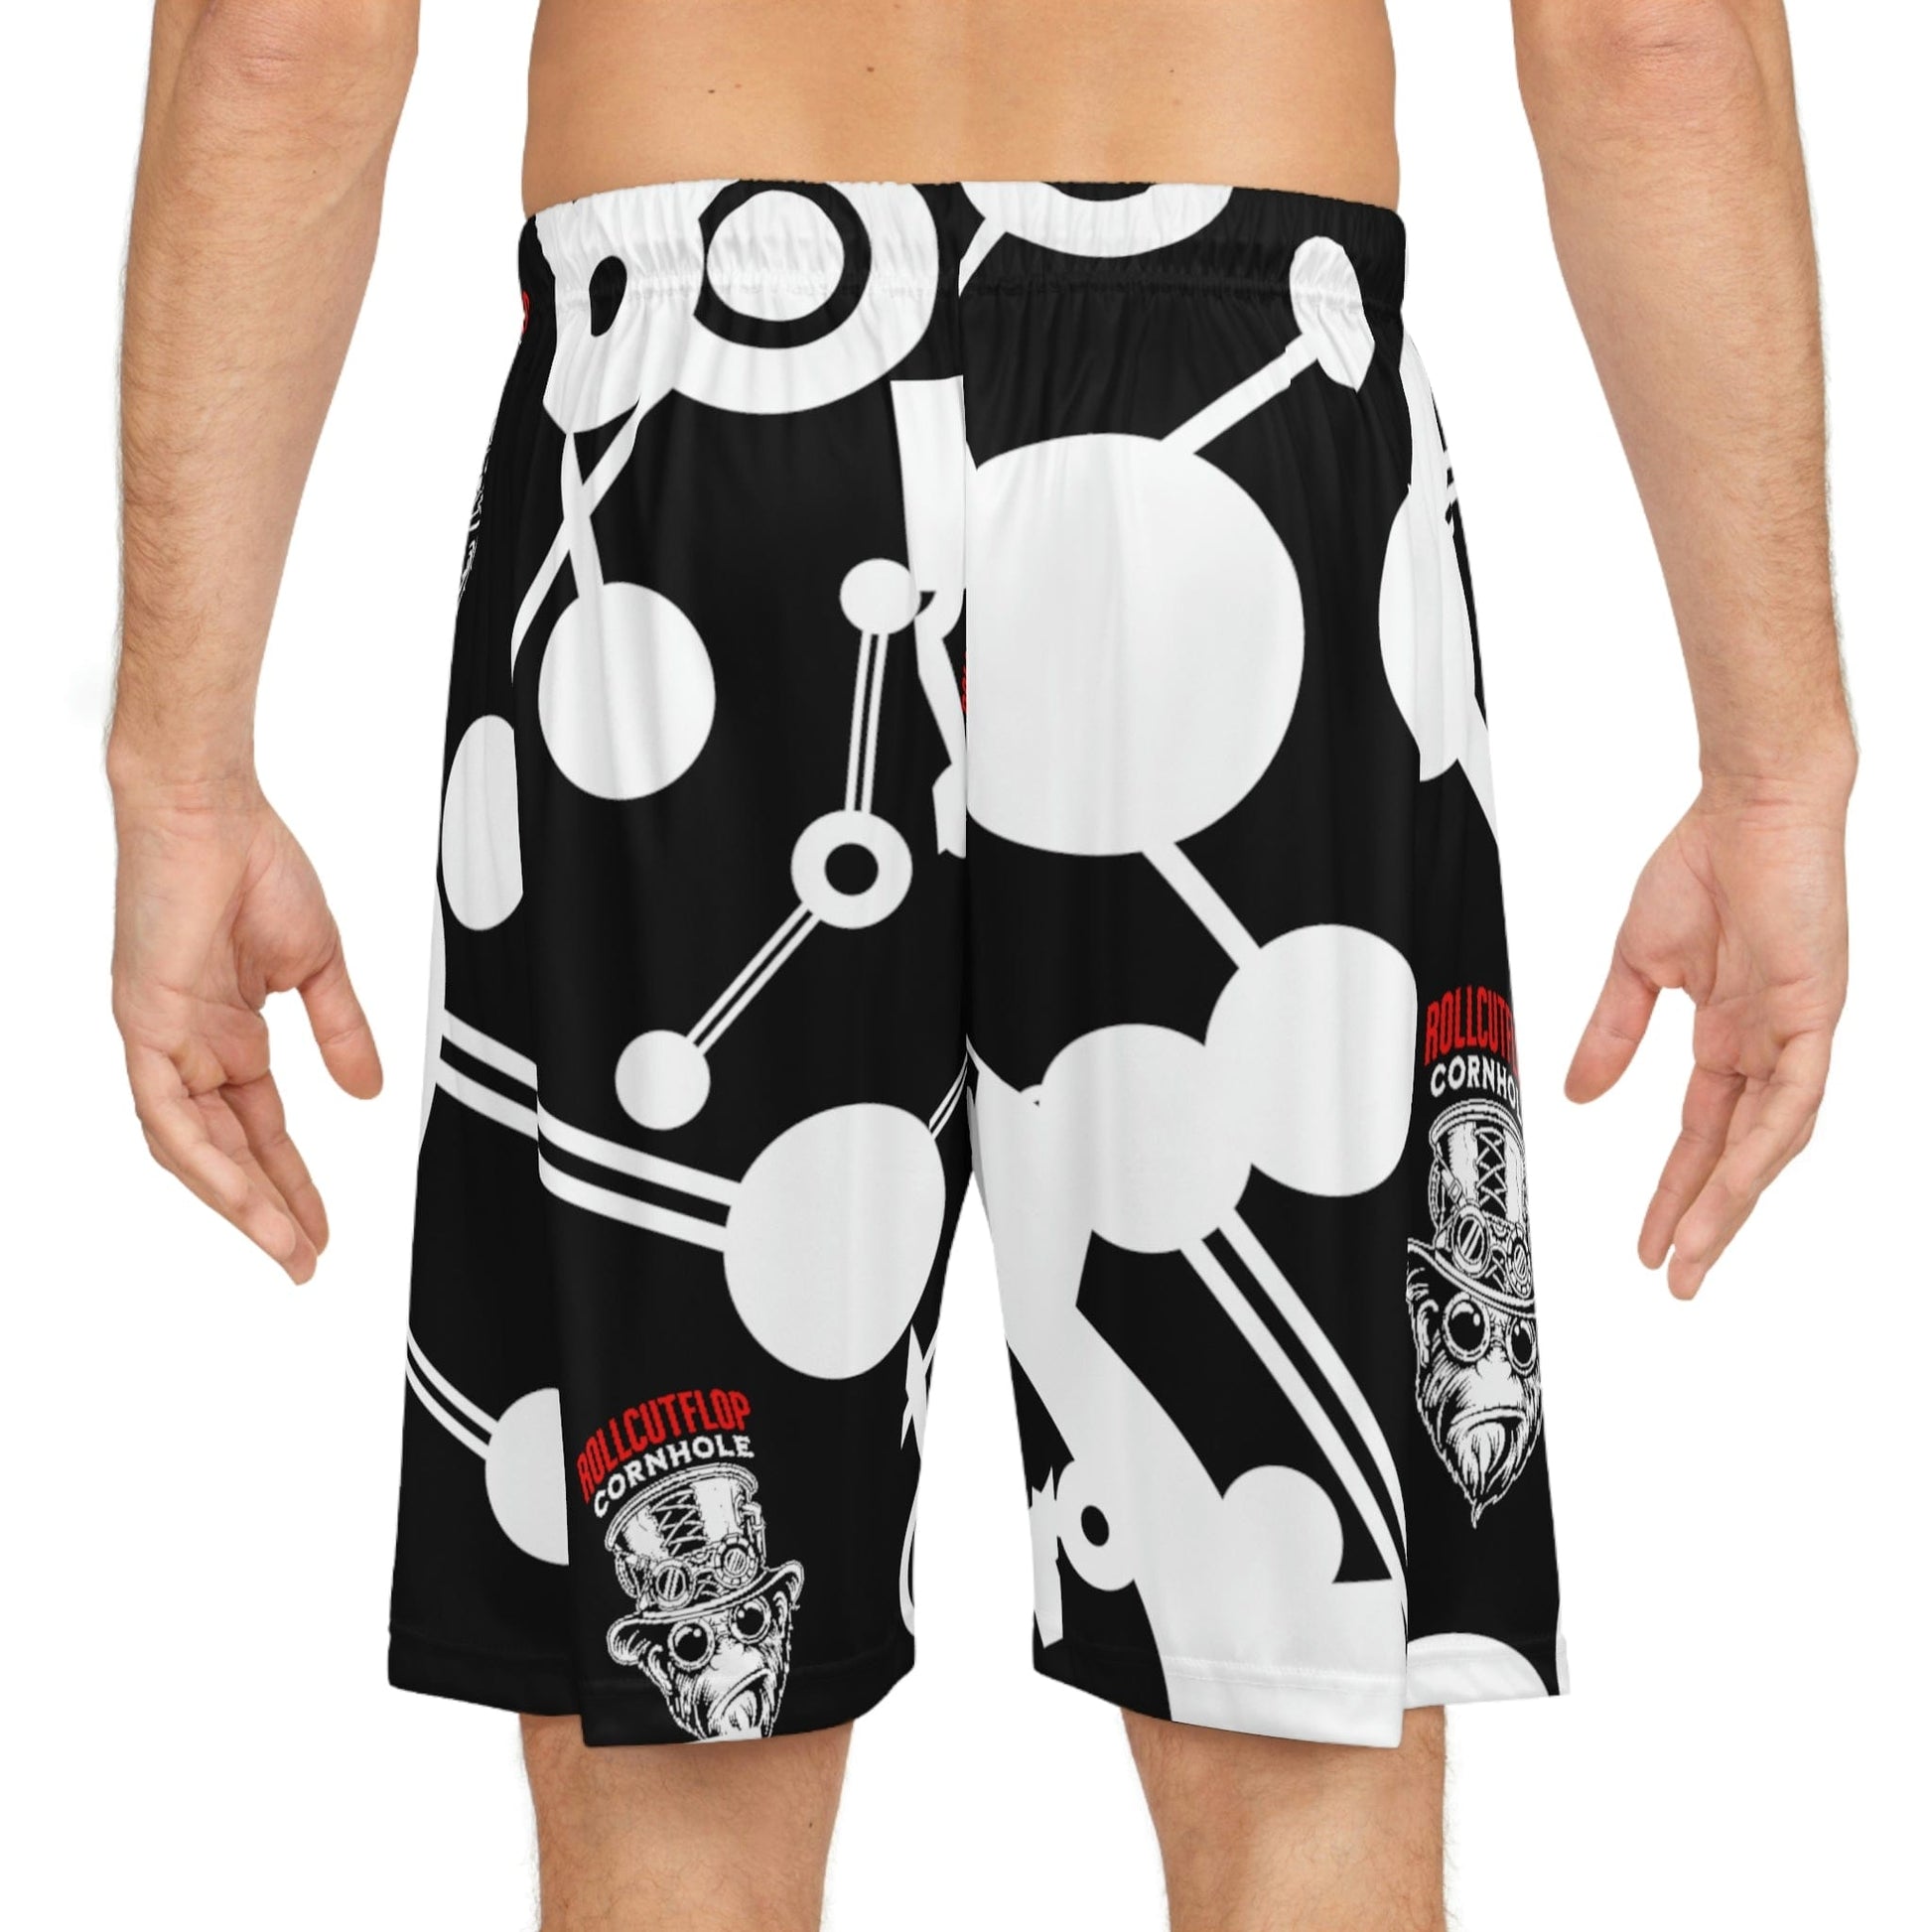 Roll Cut Flop™ All Over Print Black, Red & White Basketball Shorts - Steampunk Gorilla Logo with White Gear Print - Back view on model